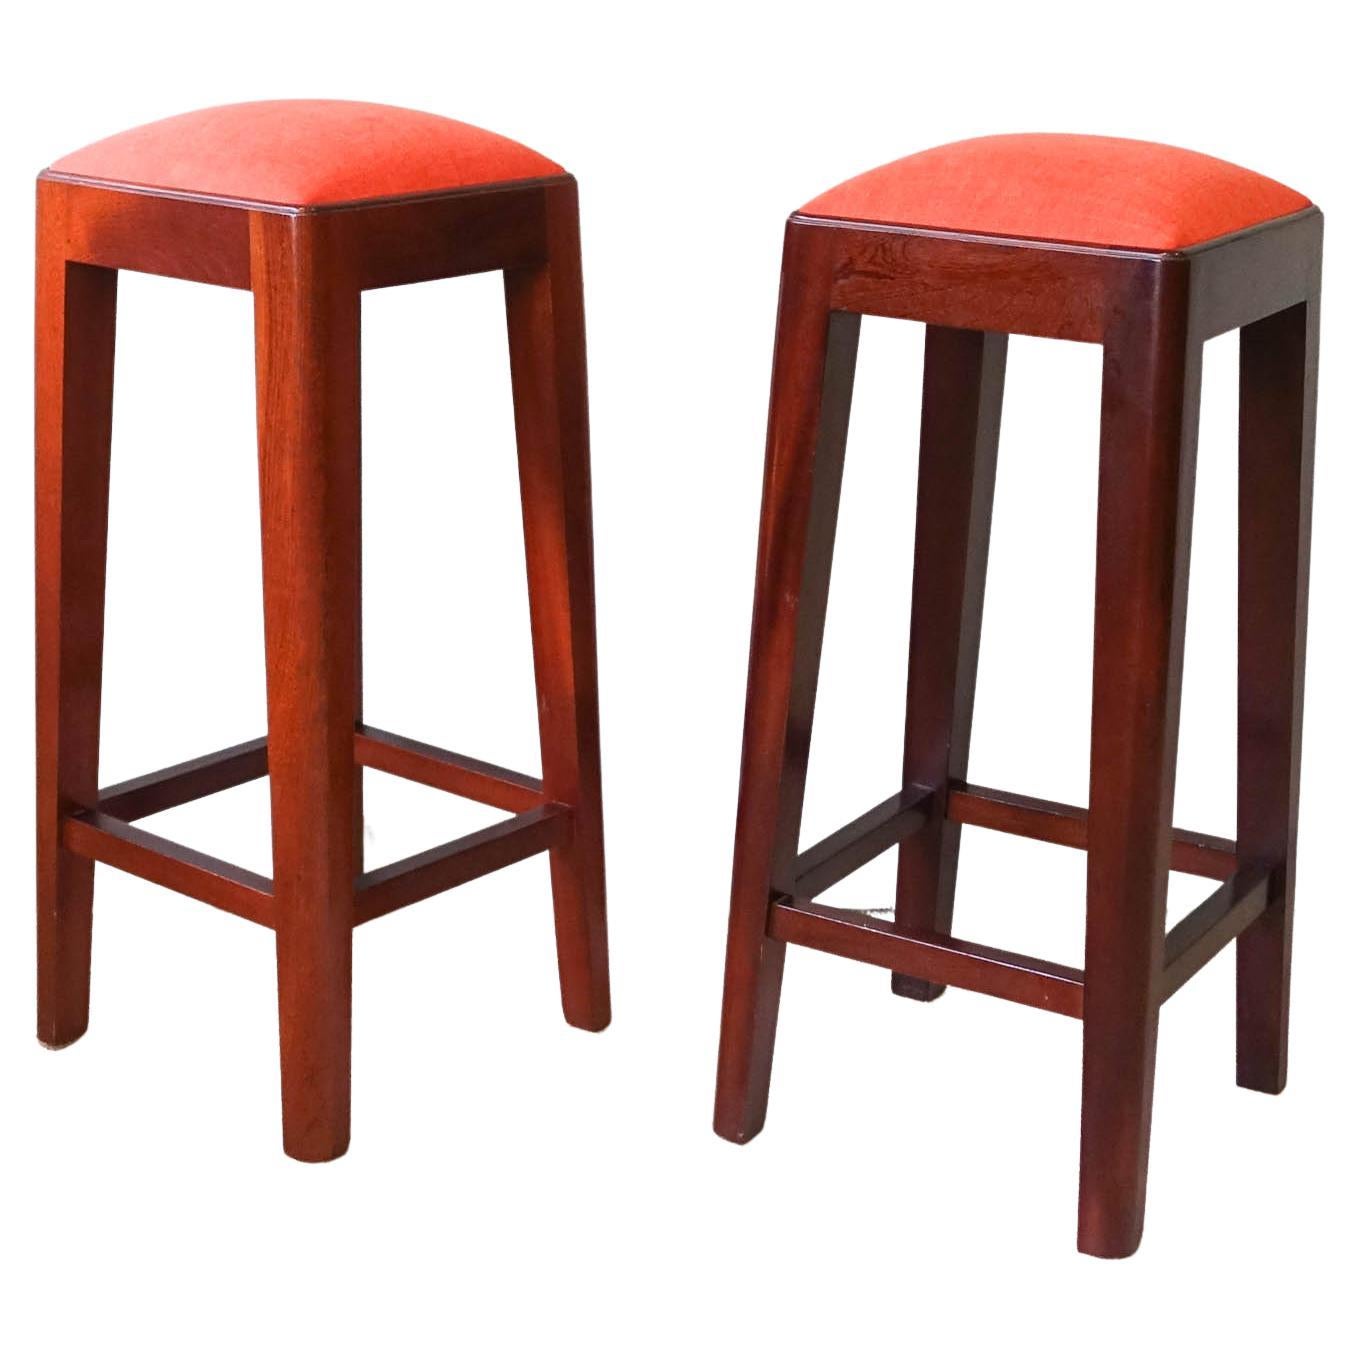 Pair of Vintage Portuguese High Stools, 1960's